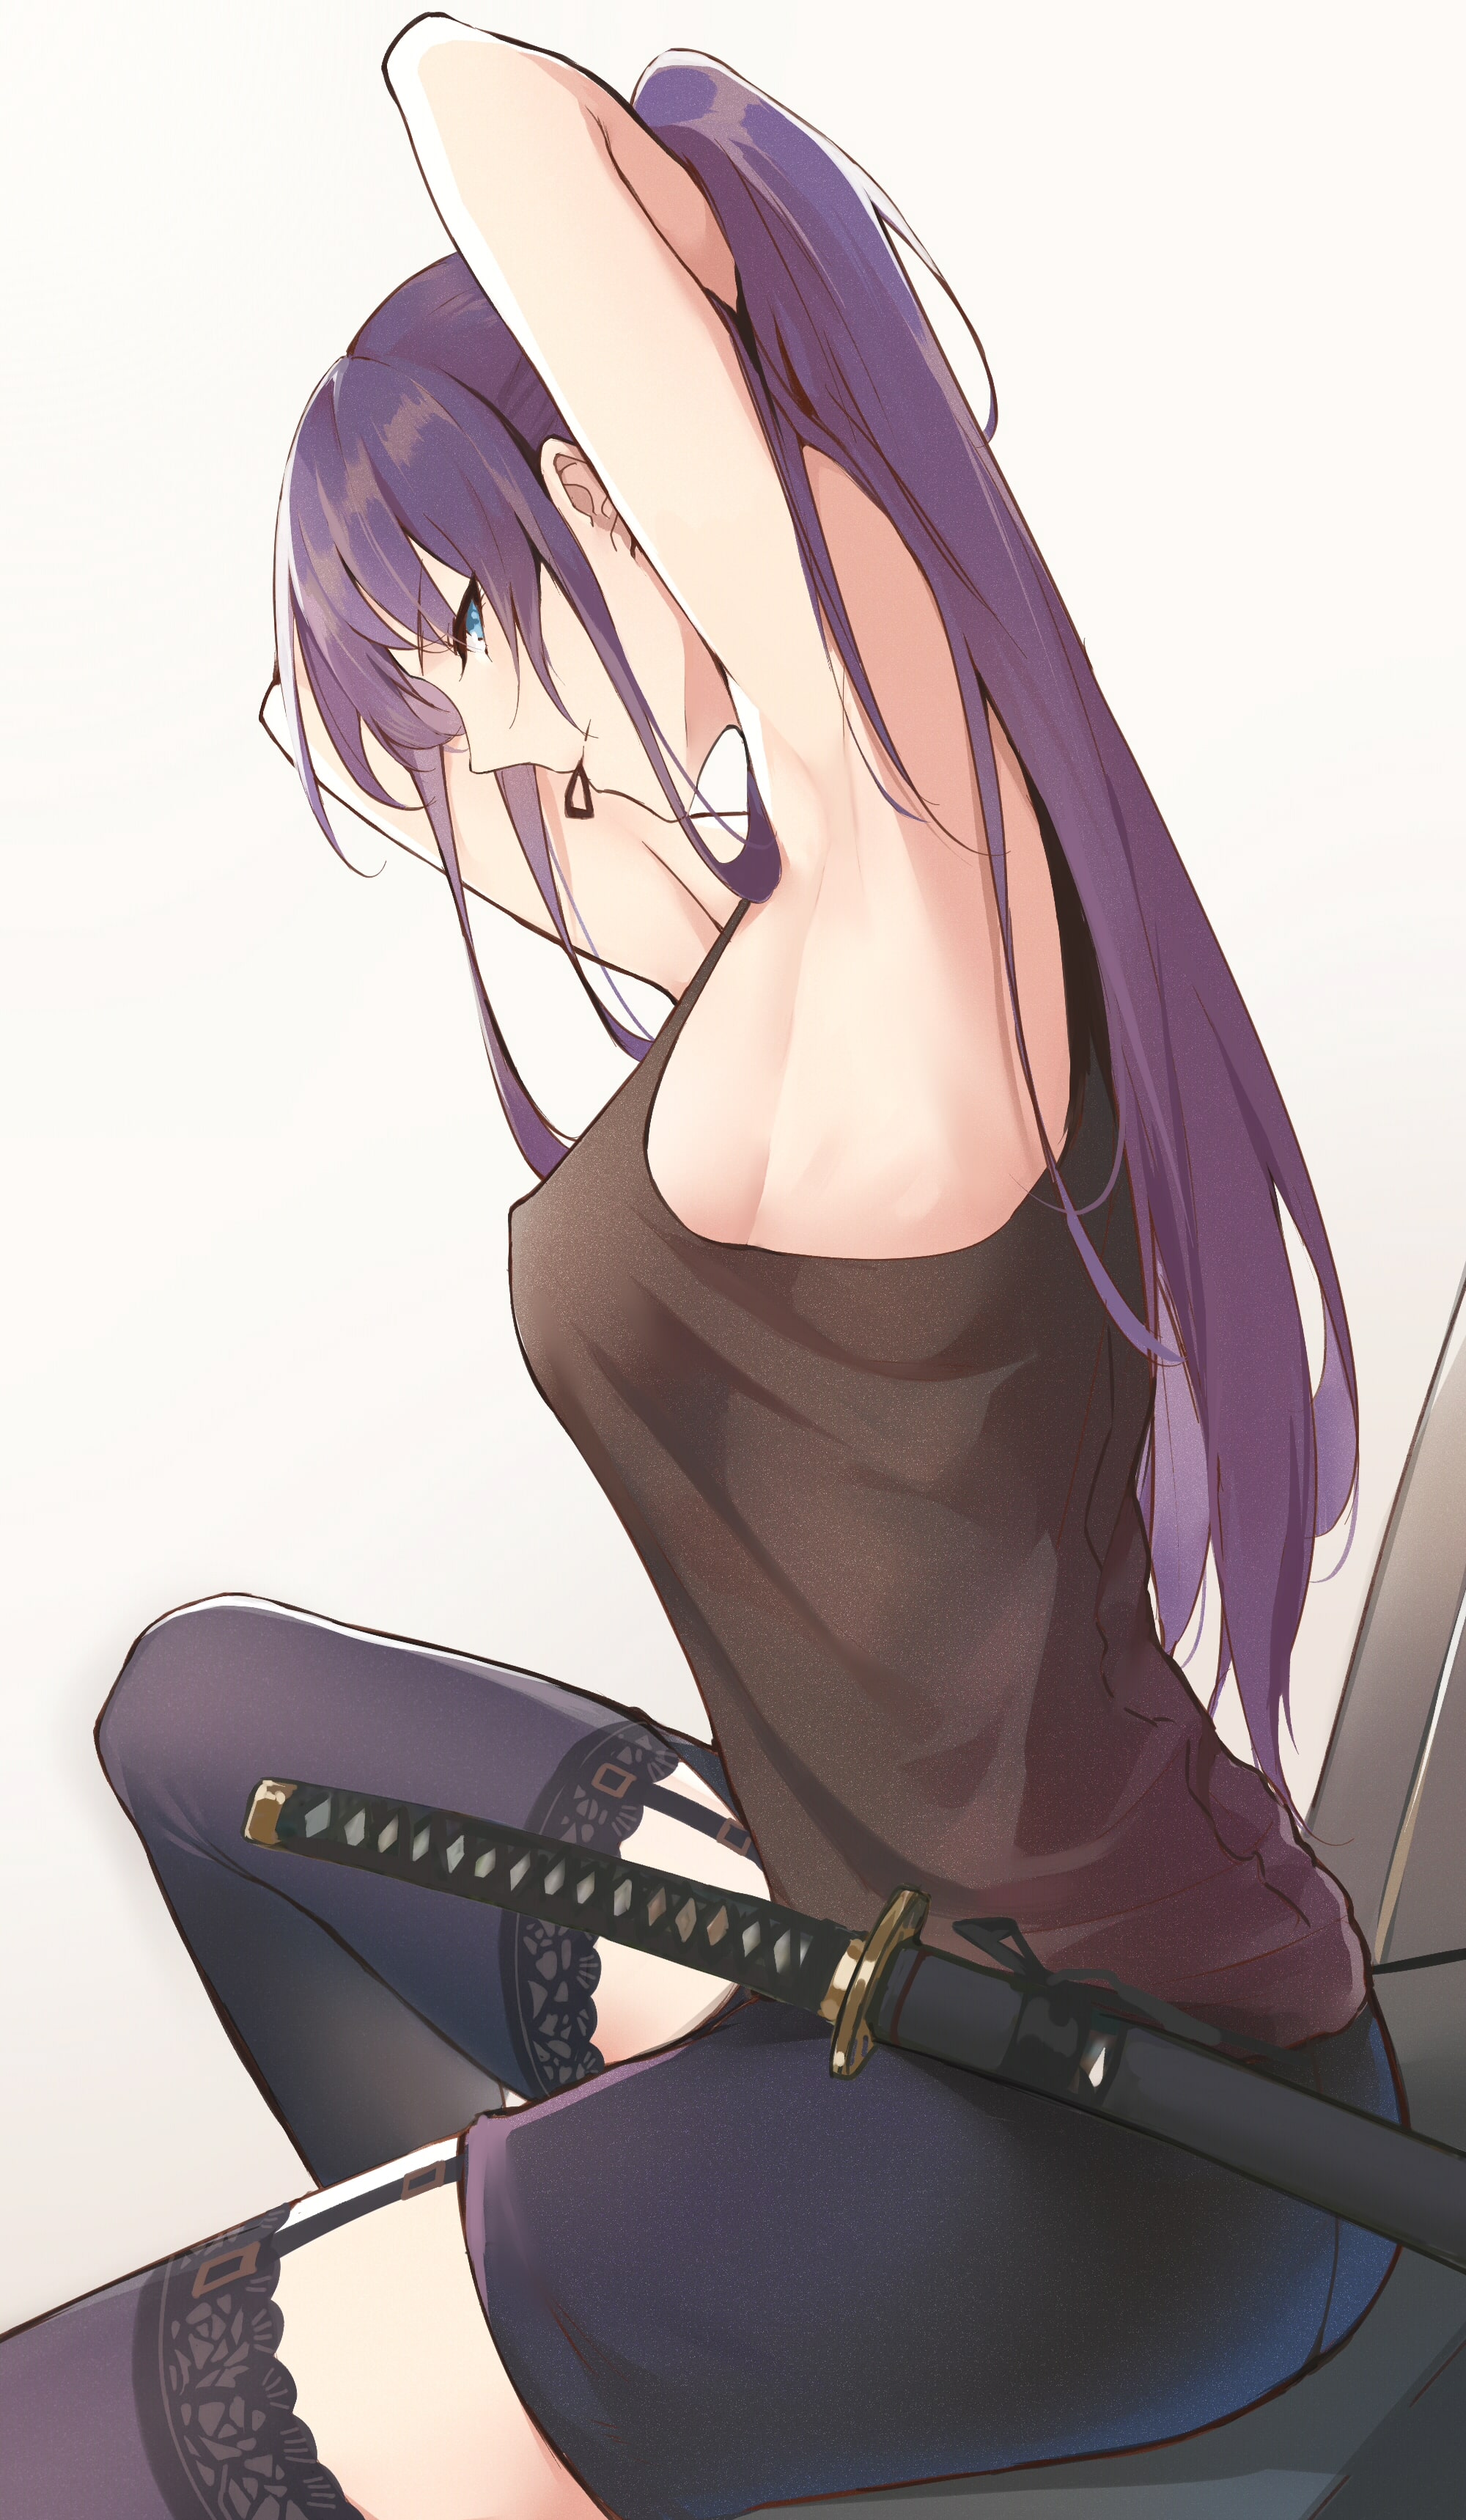 Saeko Busujima, from Anime Attack!, a roleplay on RPG